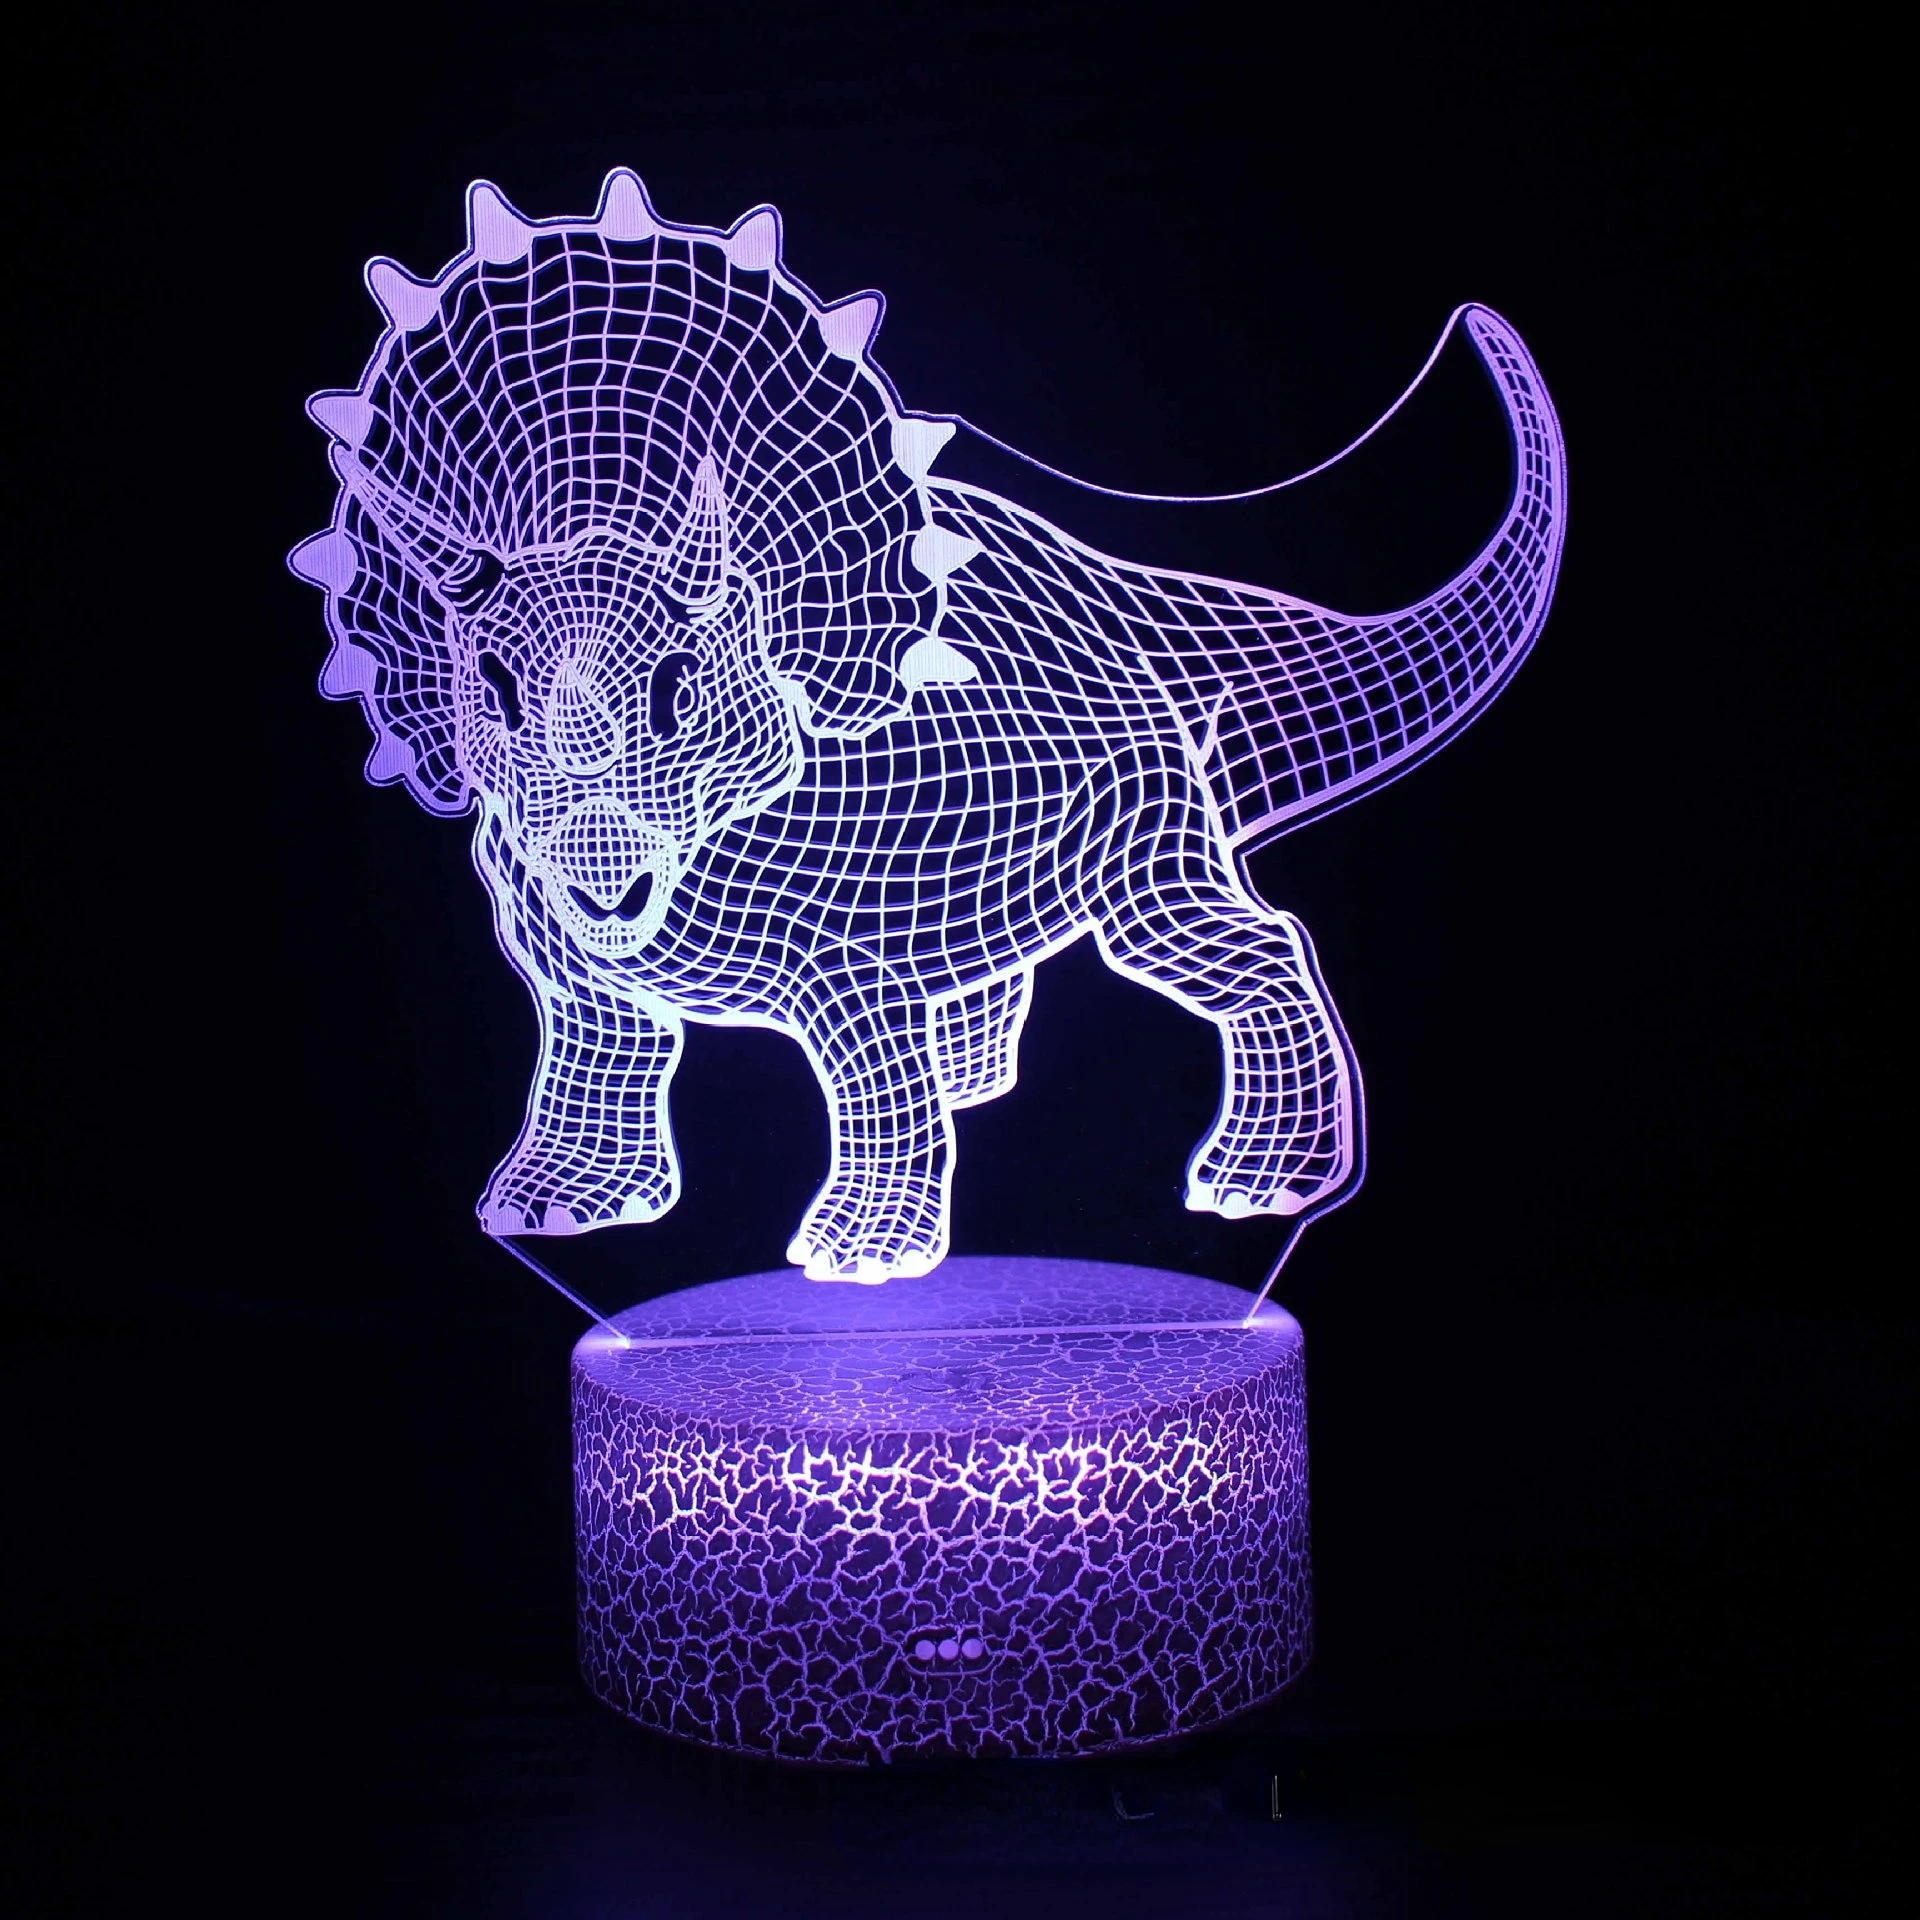 home depot dinosaur light 3D LED Dinosaur Night Lights Colorful Touch Remote Control 7/16 Color Desk Lamp Christmas Gift Visual Light Dragon Series night stand lamps Night Lights